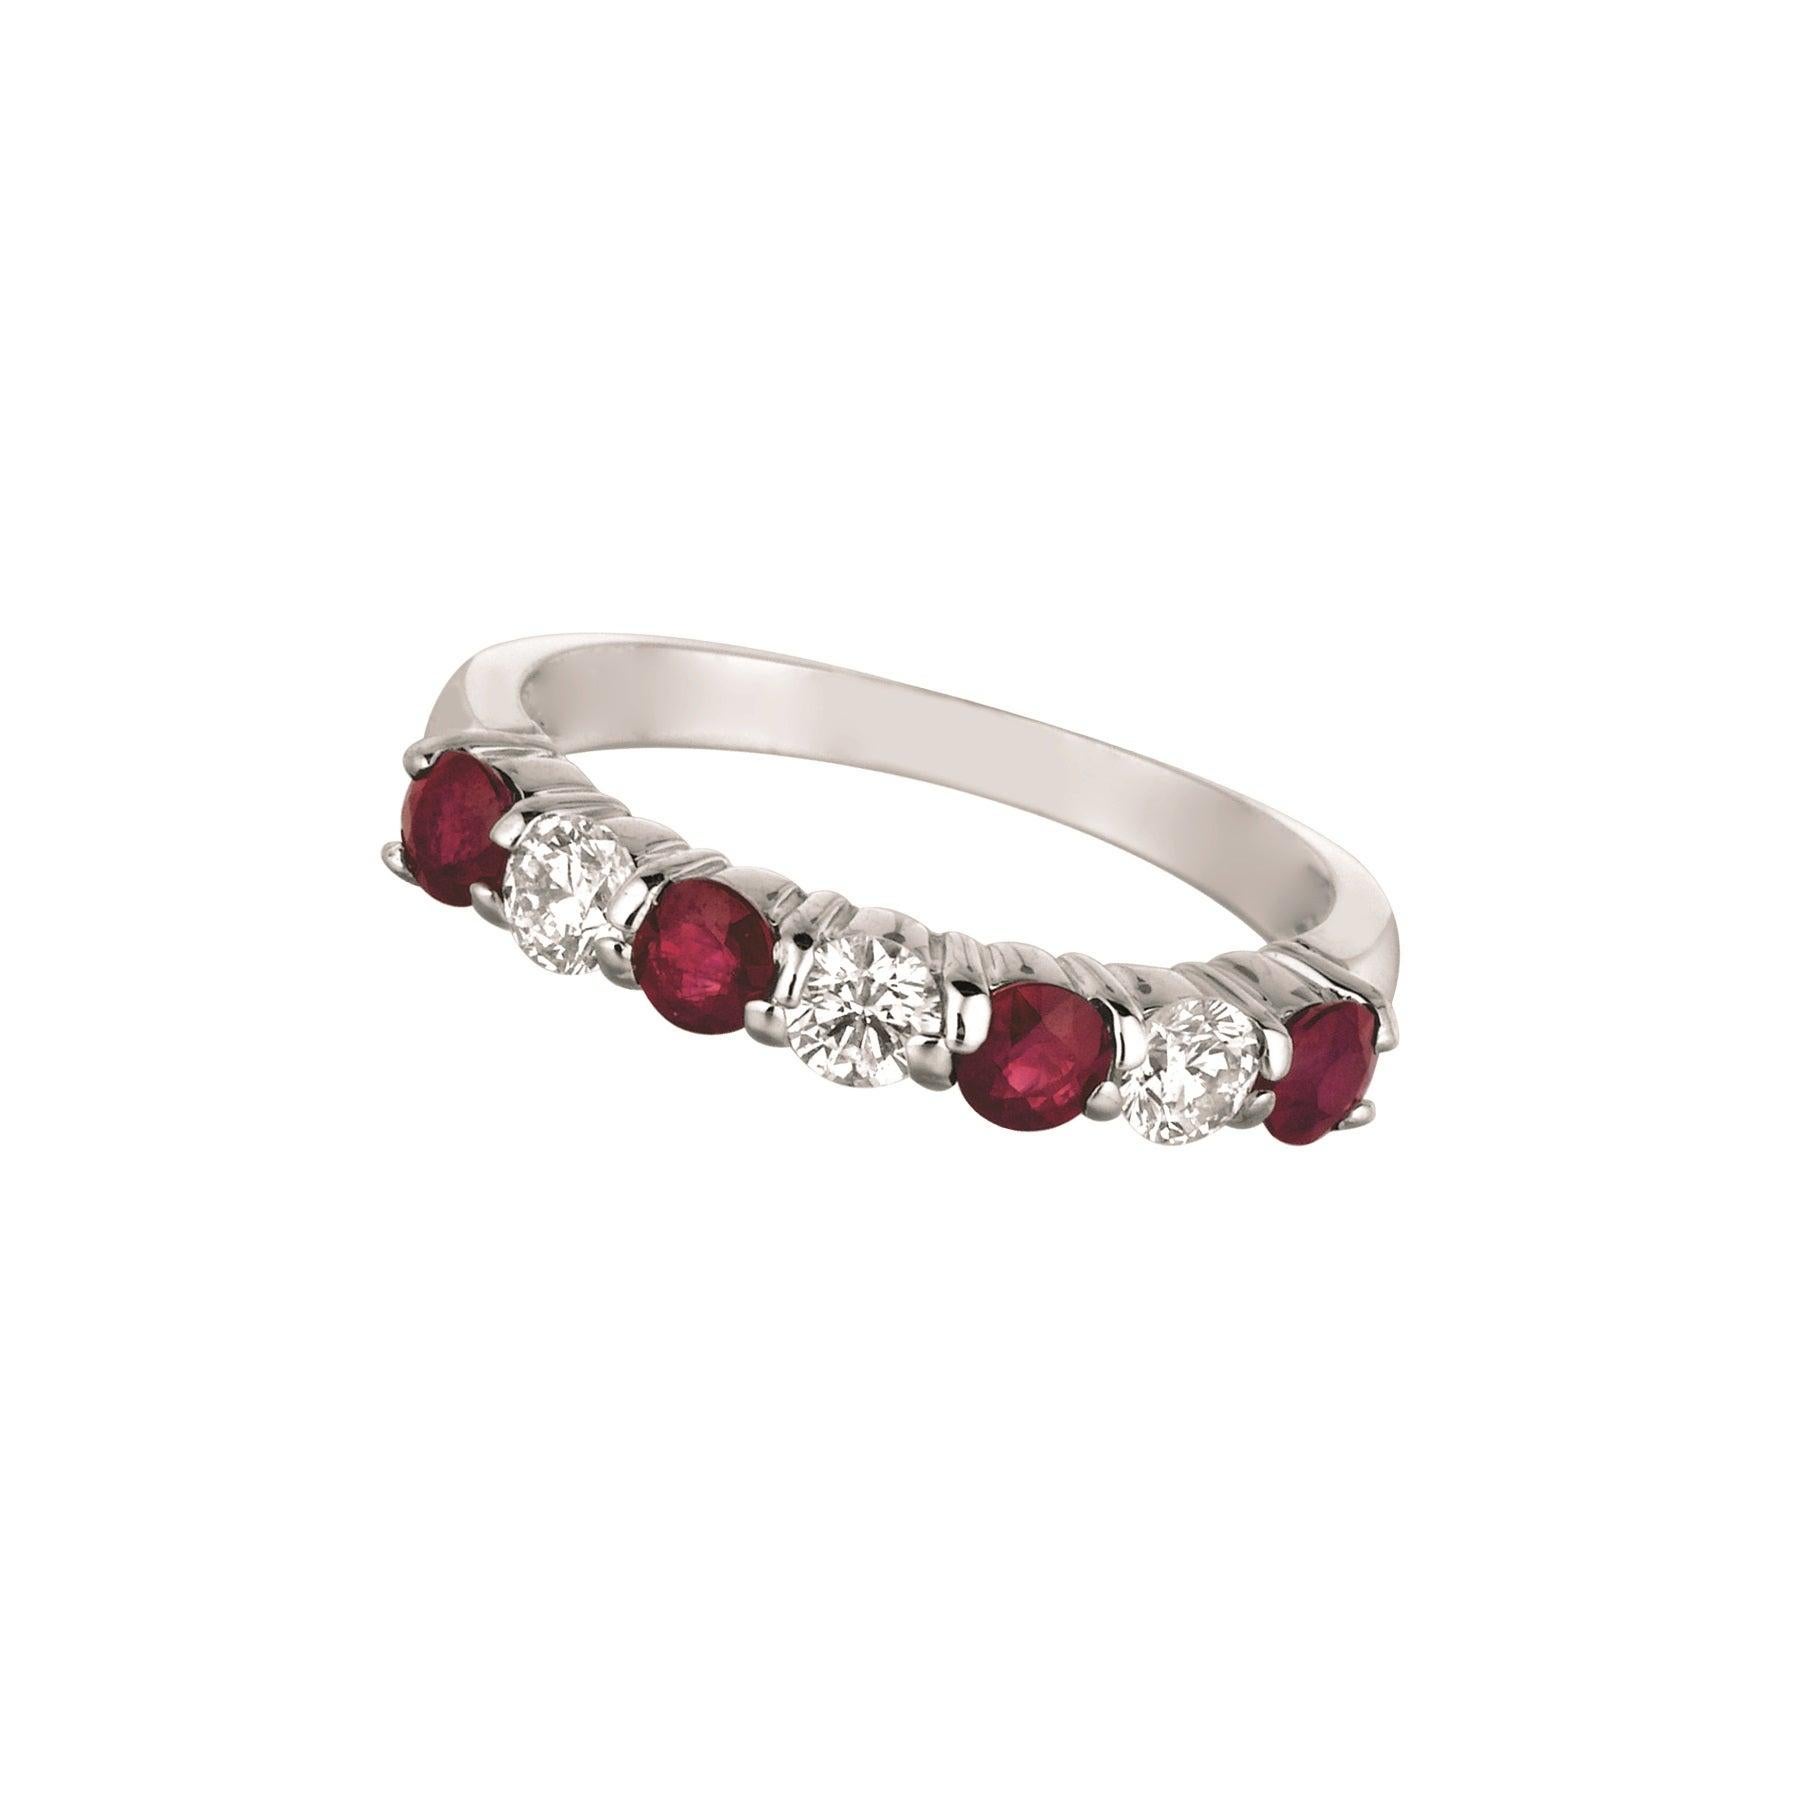 For Sale:  1.65 Carat Natural Diamond and Ruby 7-Stone Ring Band 14 Karat White Gold 4